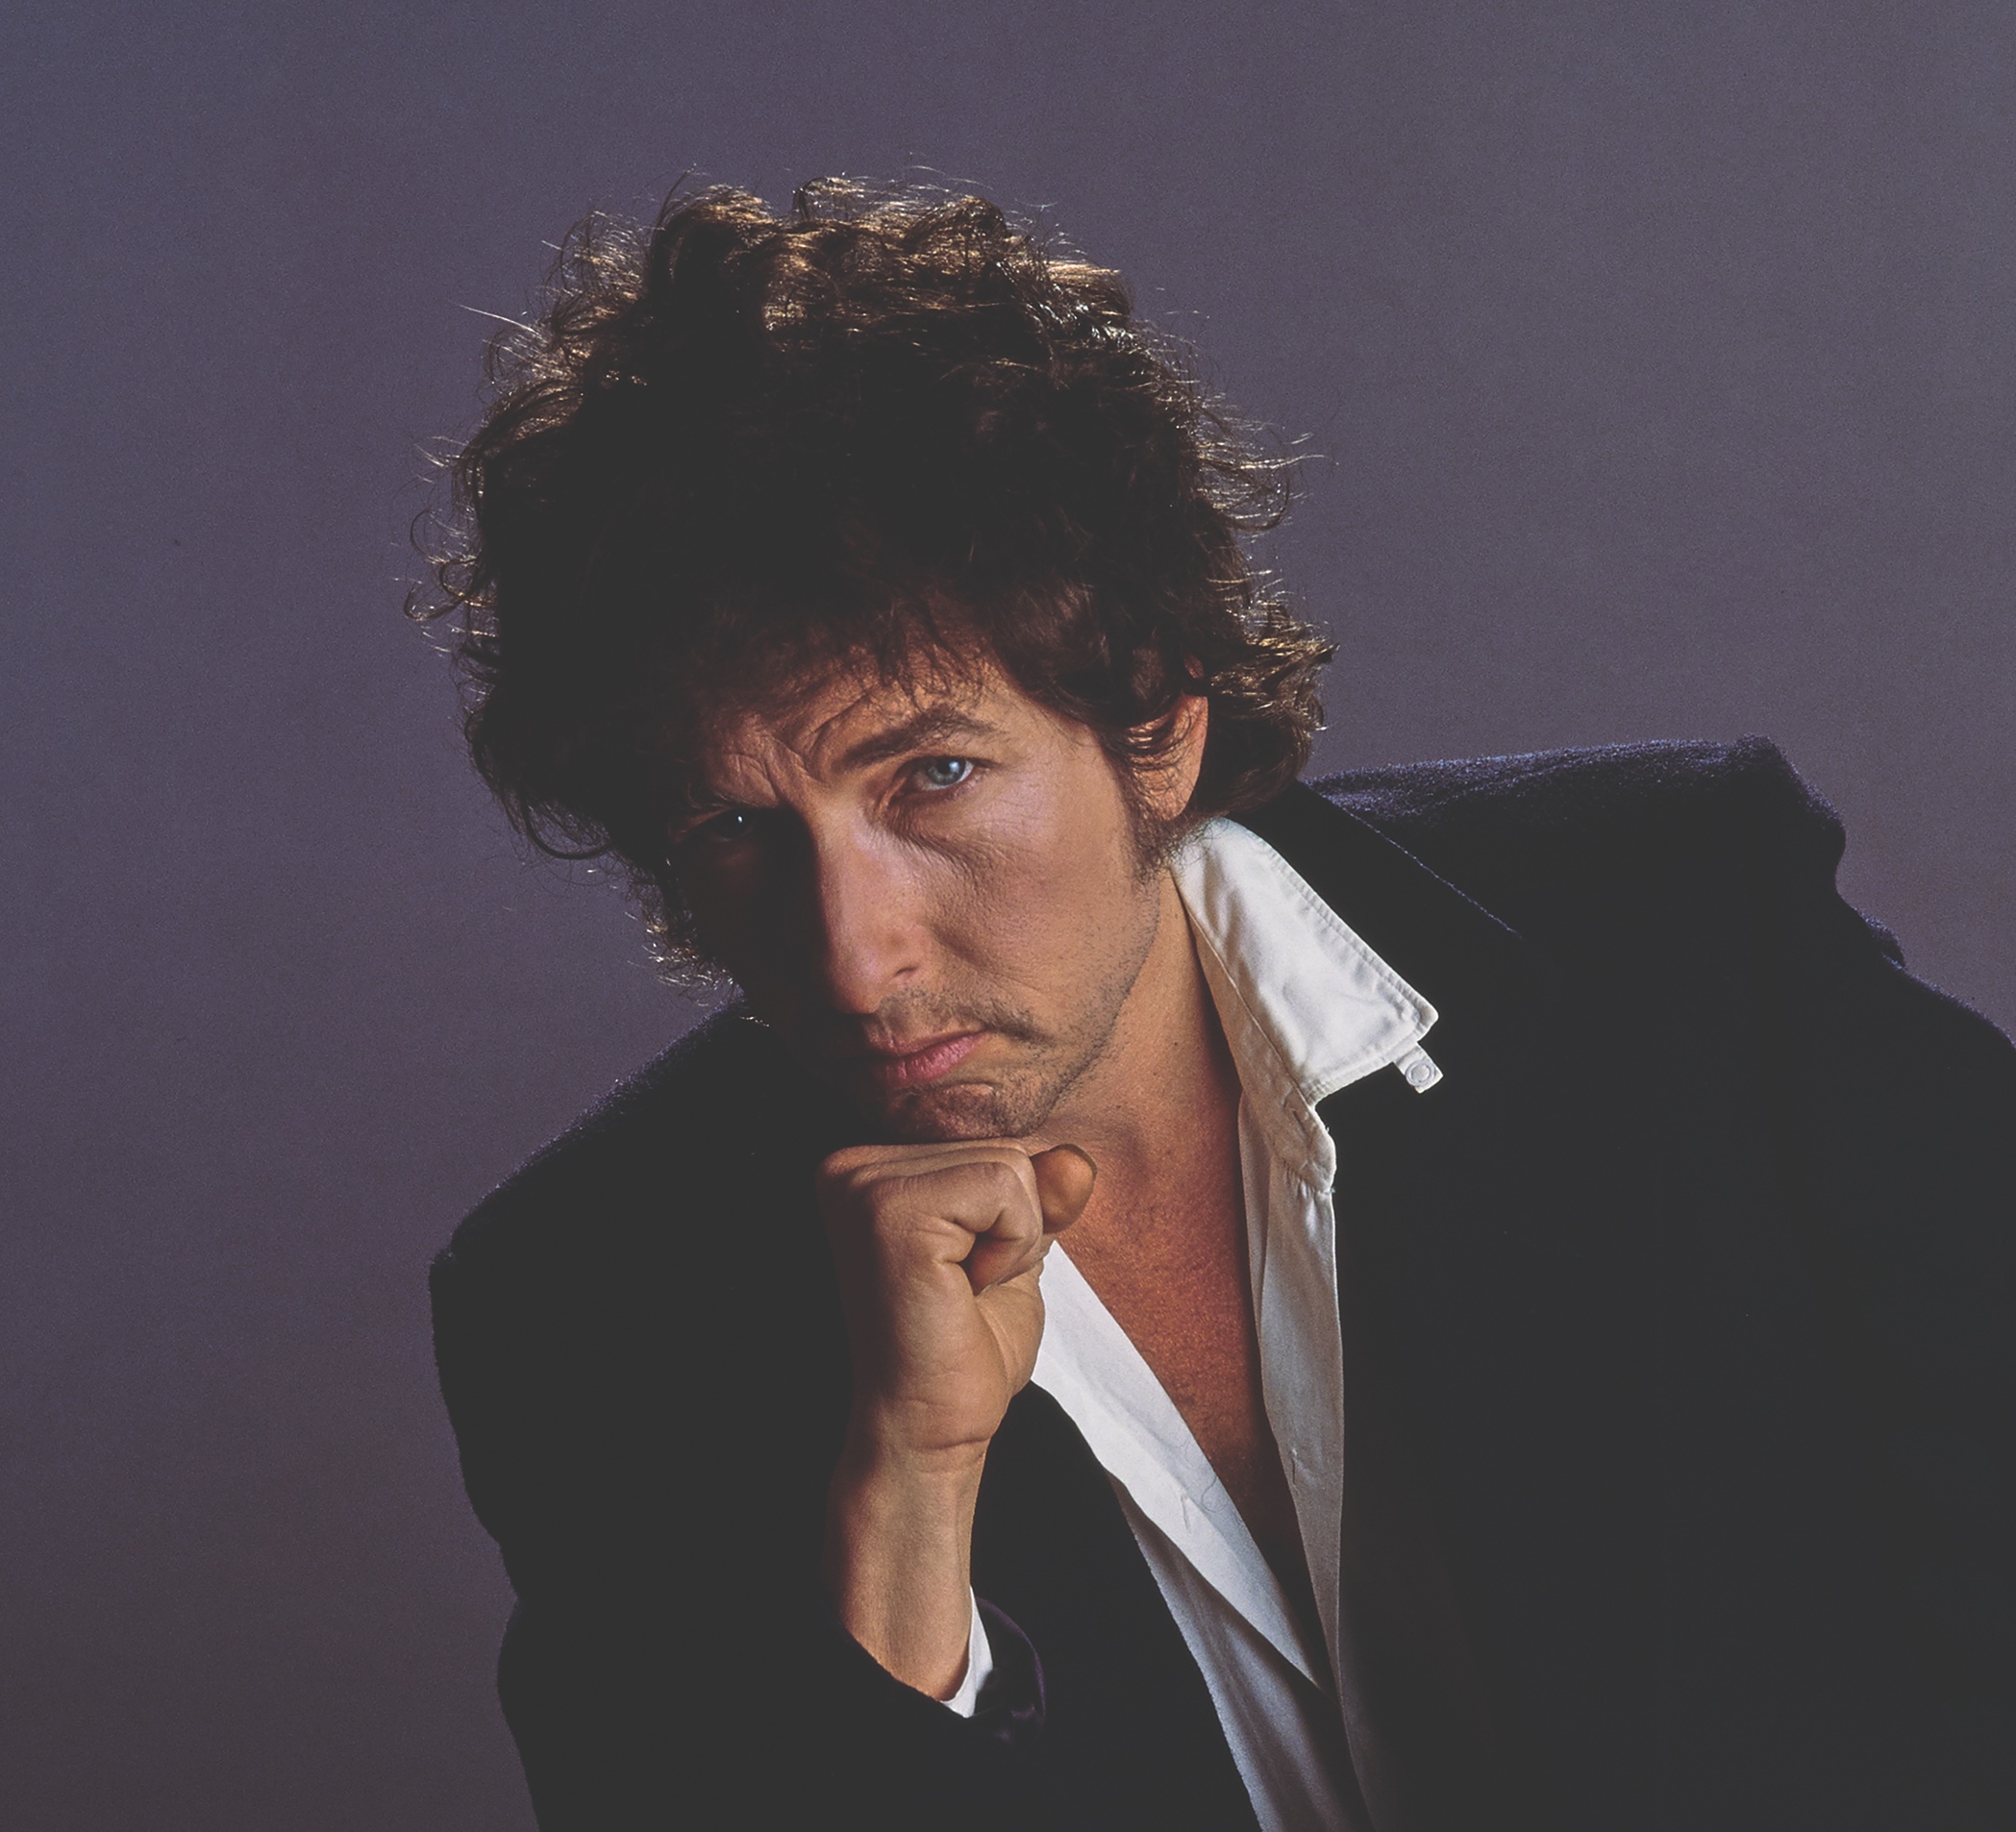 BOB DYLAN - Springtime in New York: The Bootleg Series, Vol. 16 (1980-1985) to be released on Friday, September 17th 1